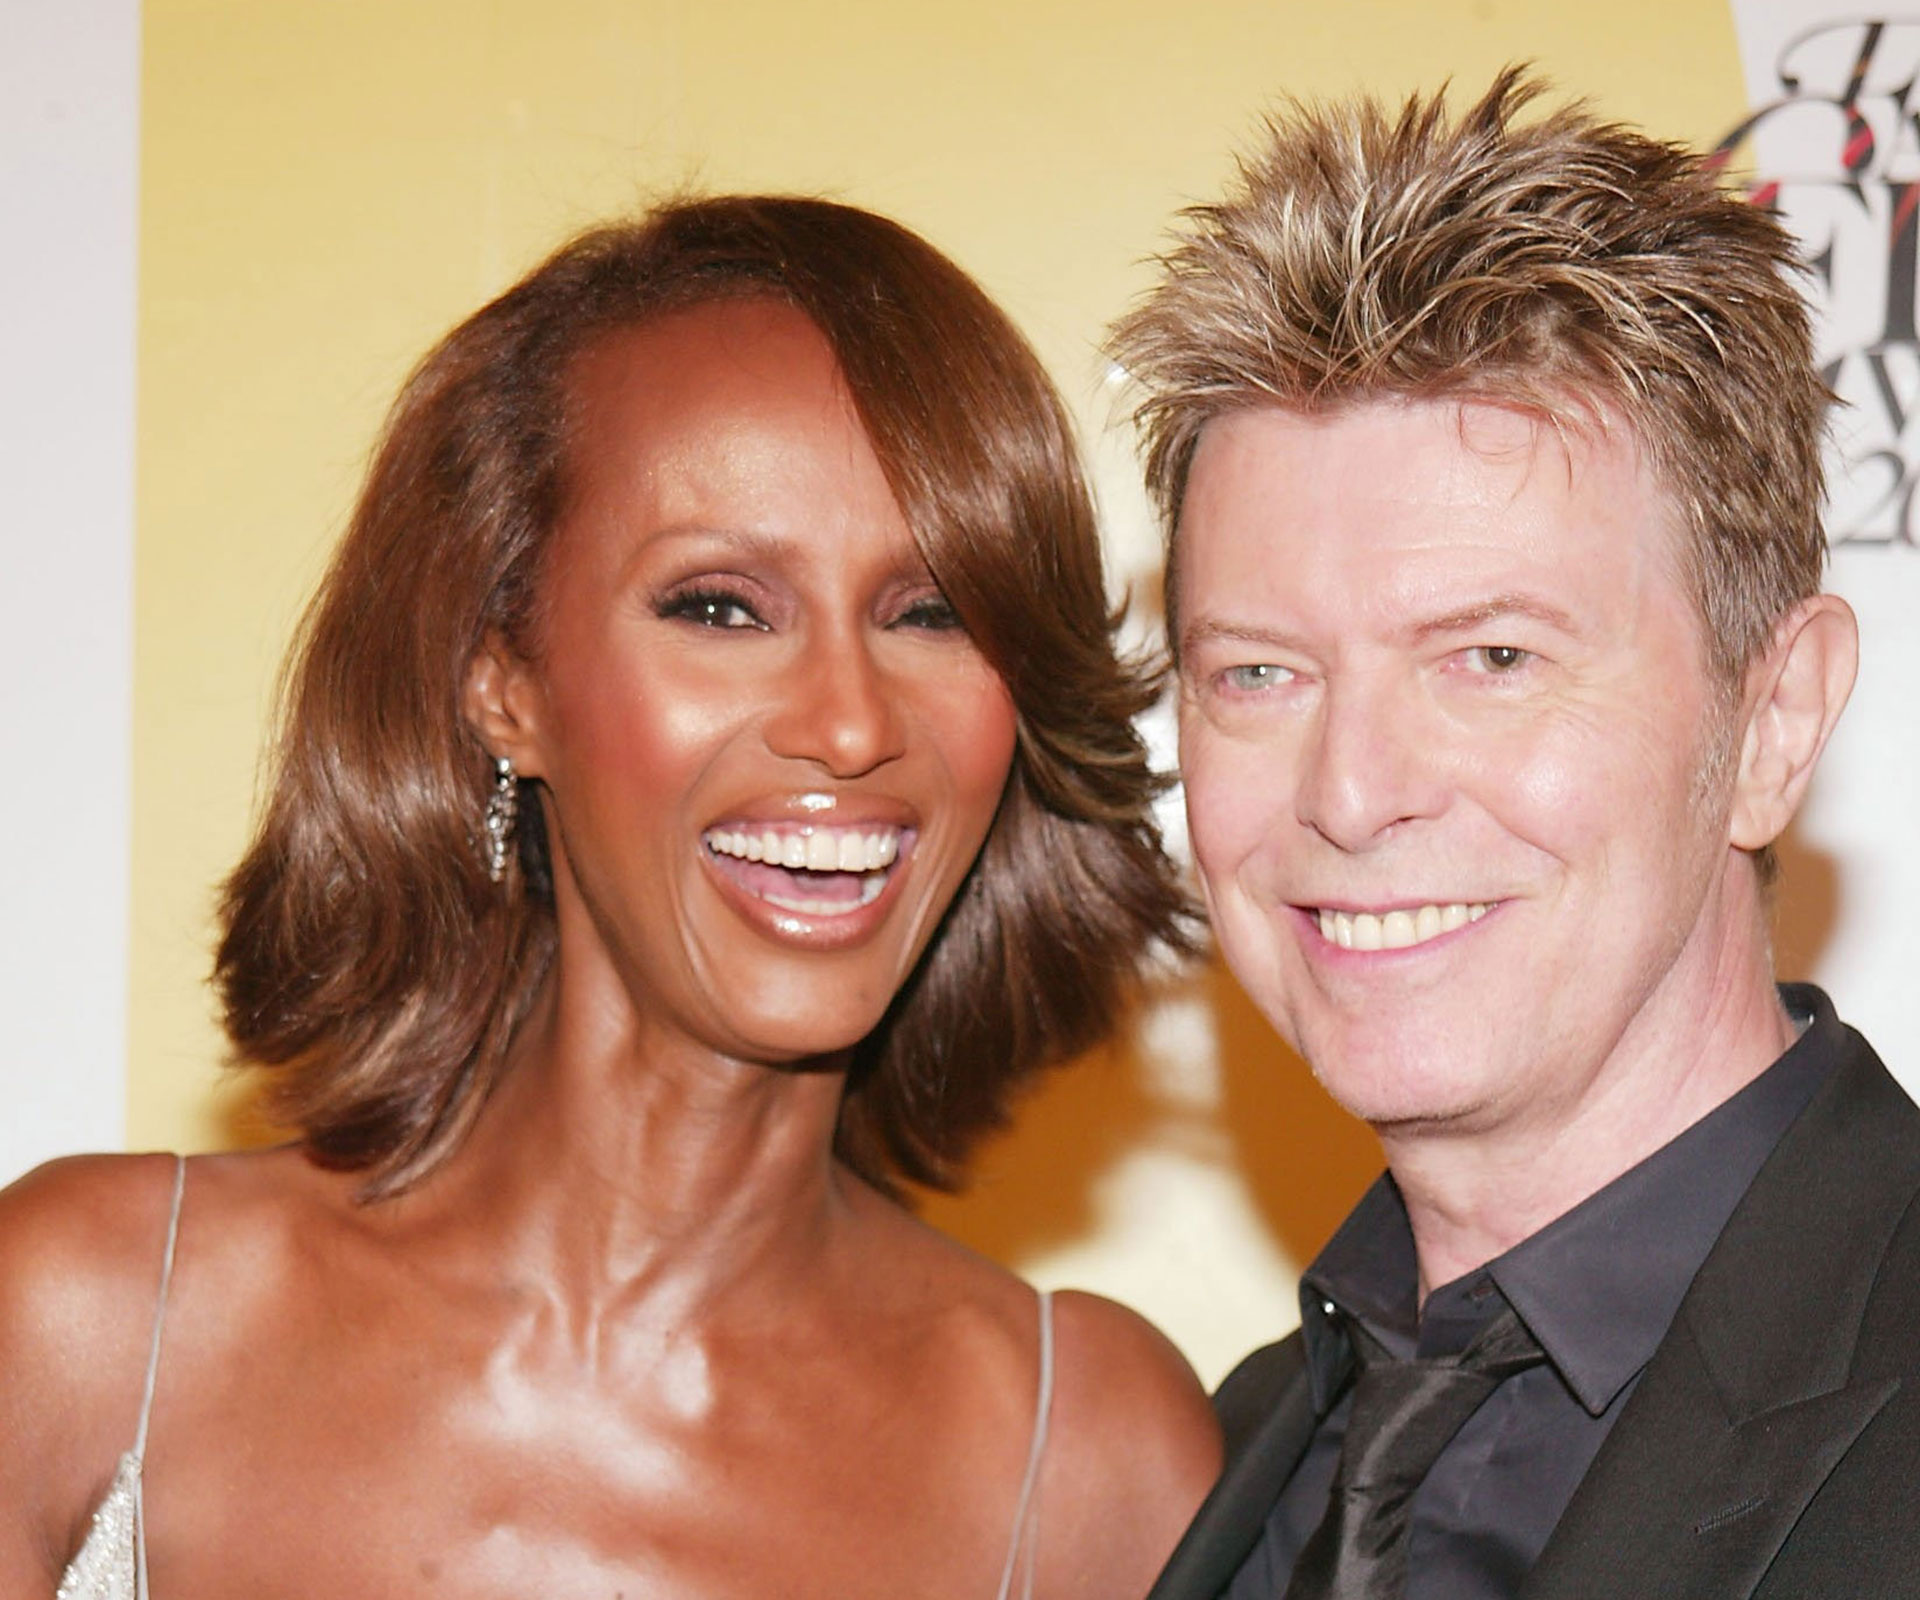 Iman shares rare photo of her and David Bowie’s daughter Lexi Jones for 16th birthday